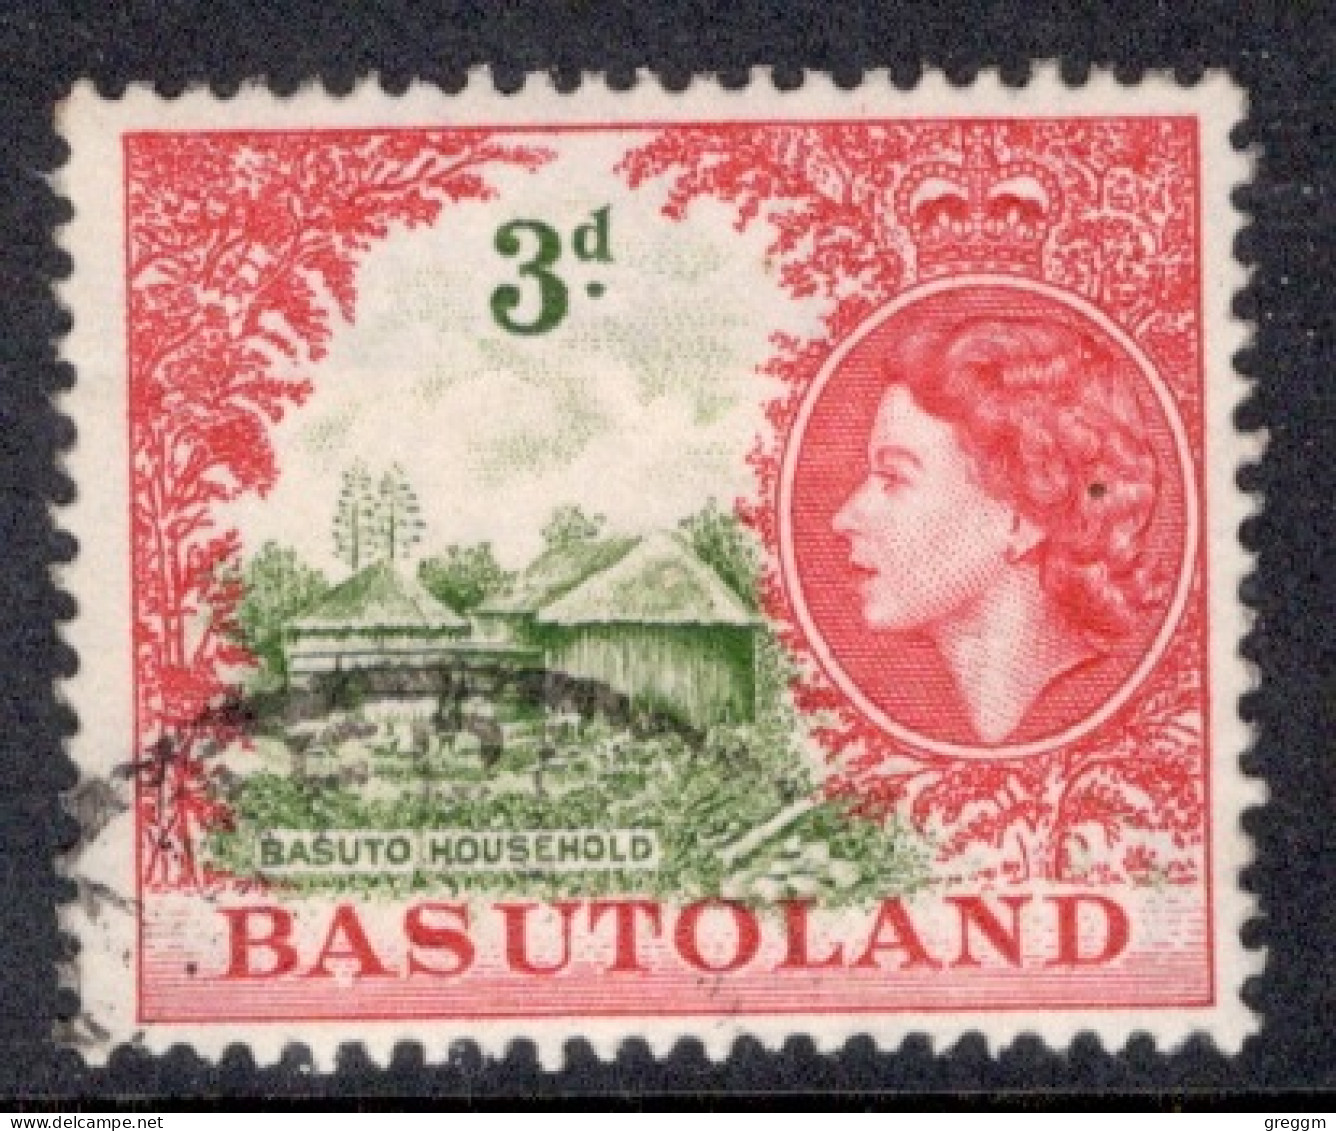 Basutoland 1954 Single 3d Stamp From The Queen Elizabeth Definitive Set In Fine Used. - 1933-1964 Crown Colony